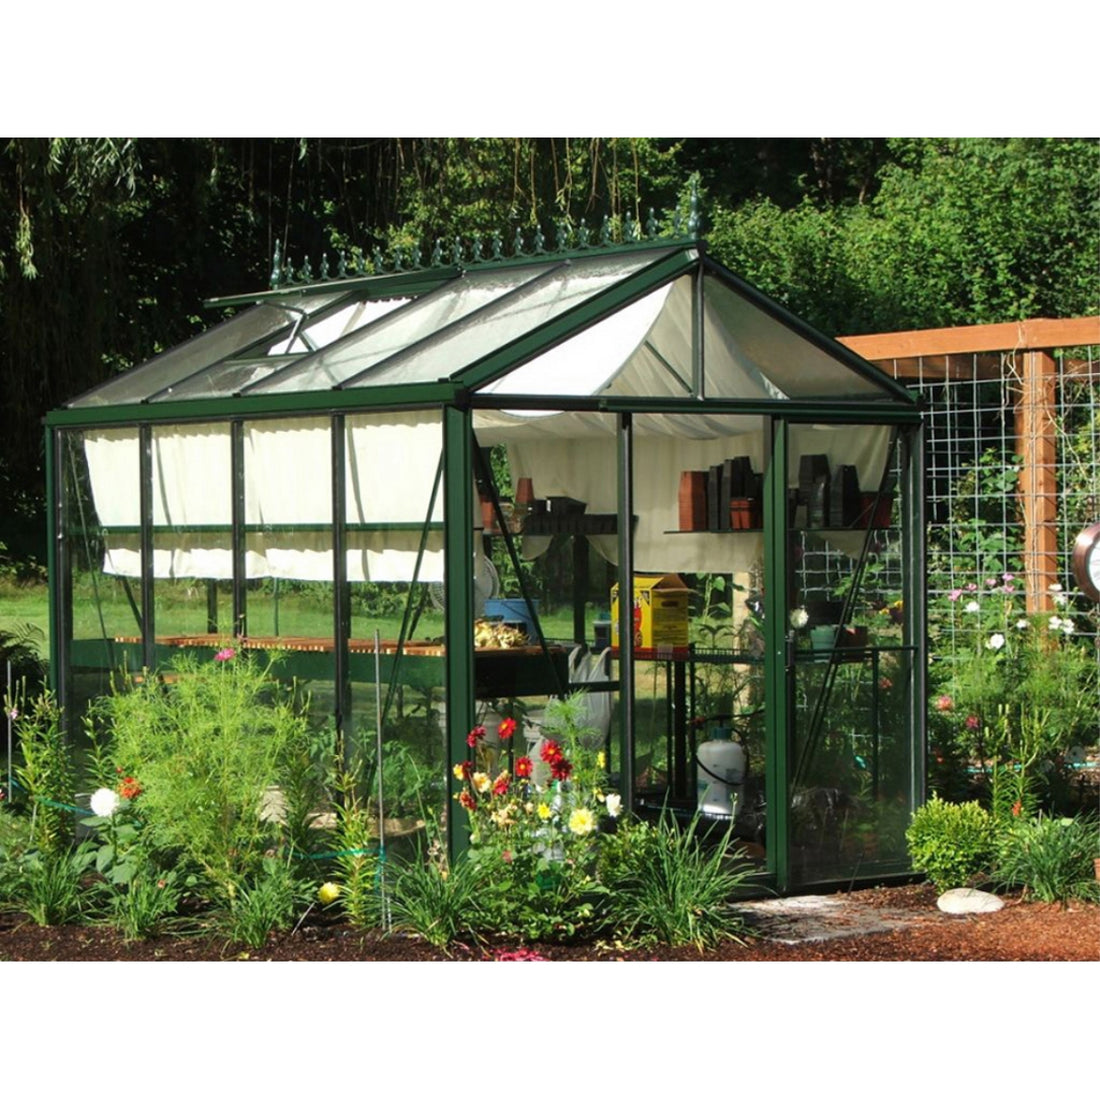 Creative Uses for a Greenhouse